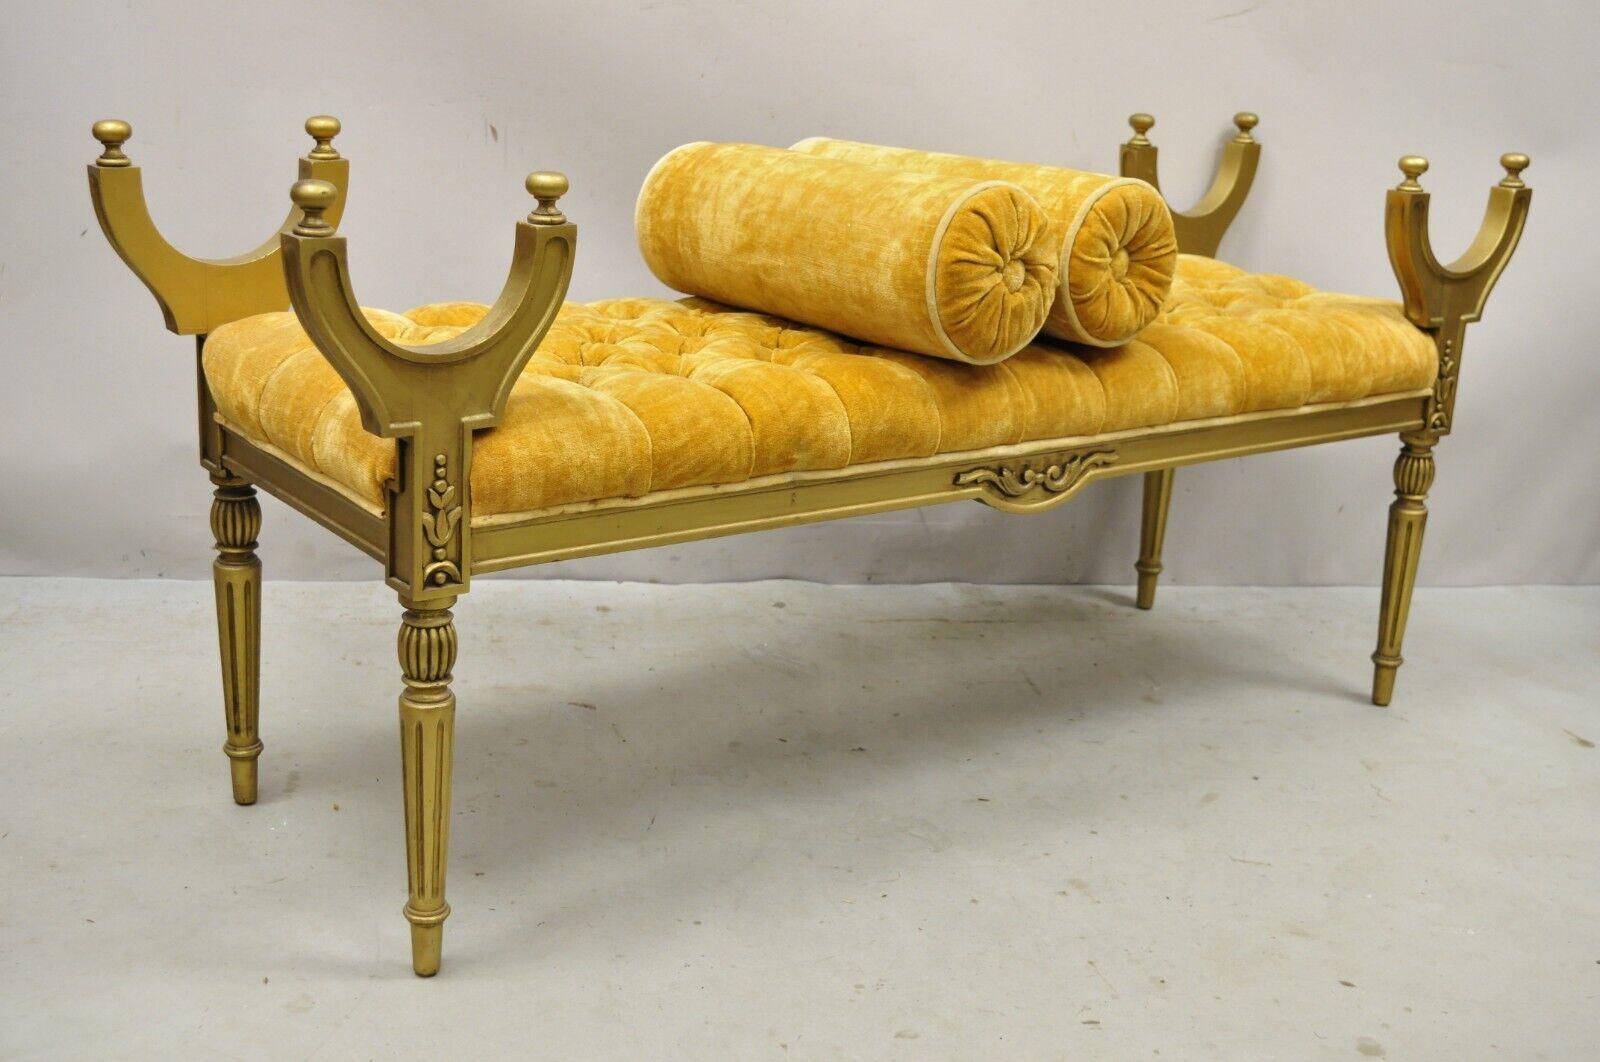 Vintage Gold Hollywood Regency French Style Window Bench with Tufted Upholstery 5